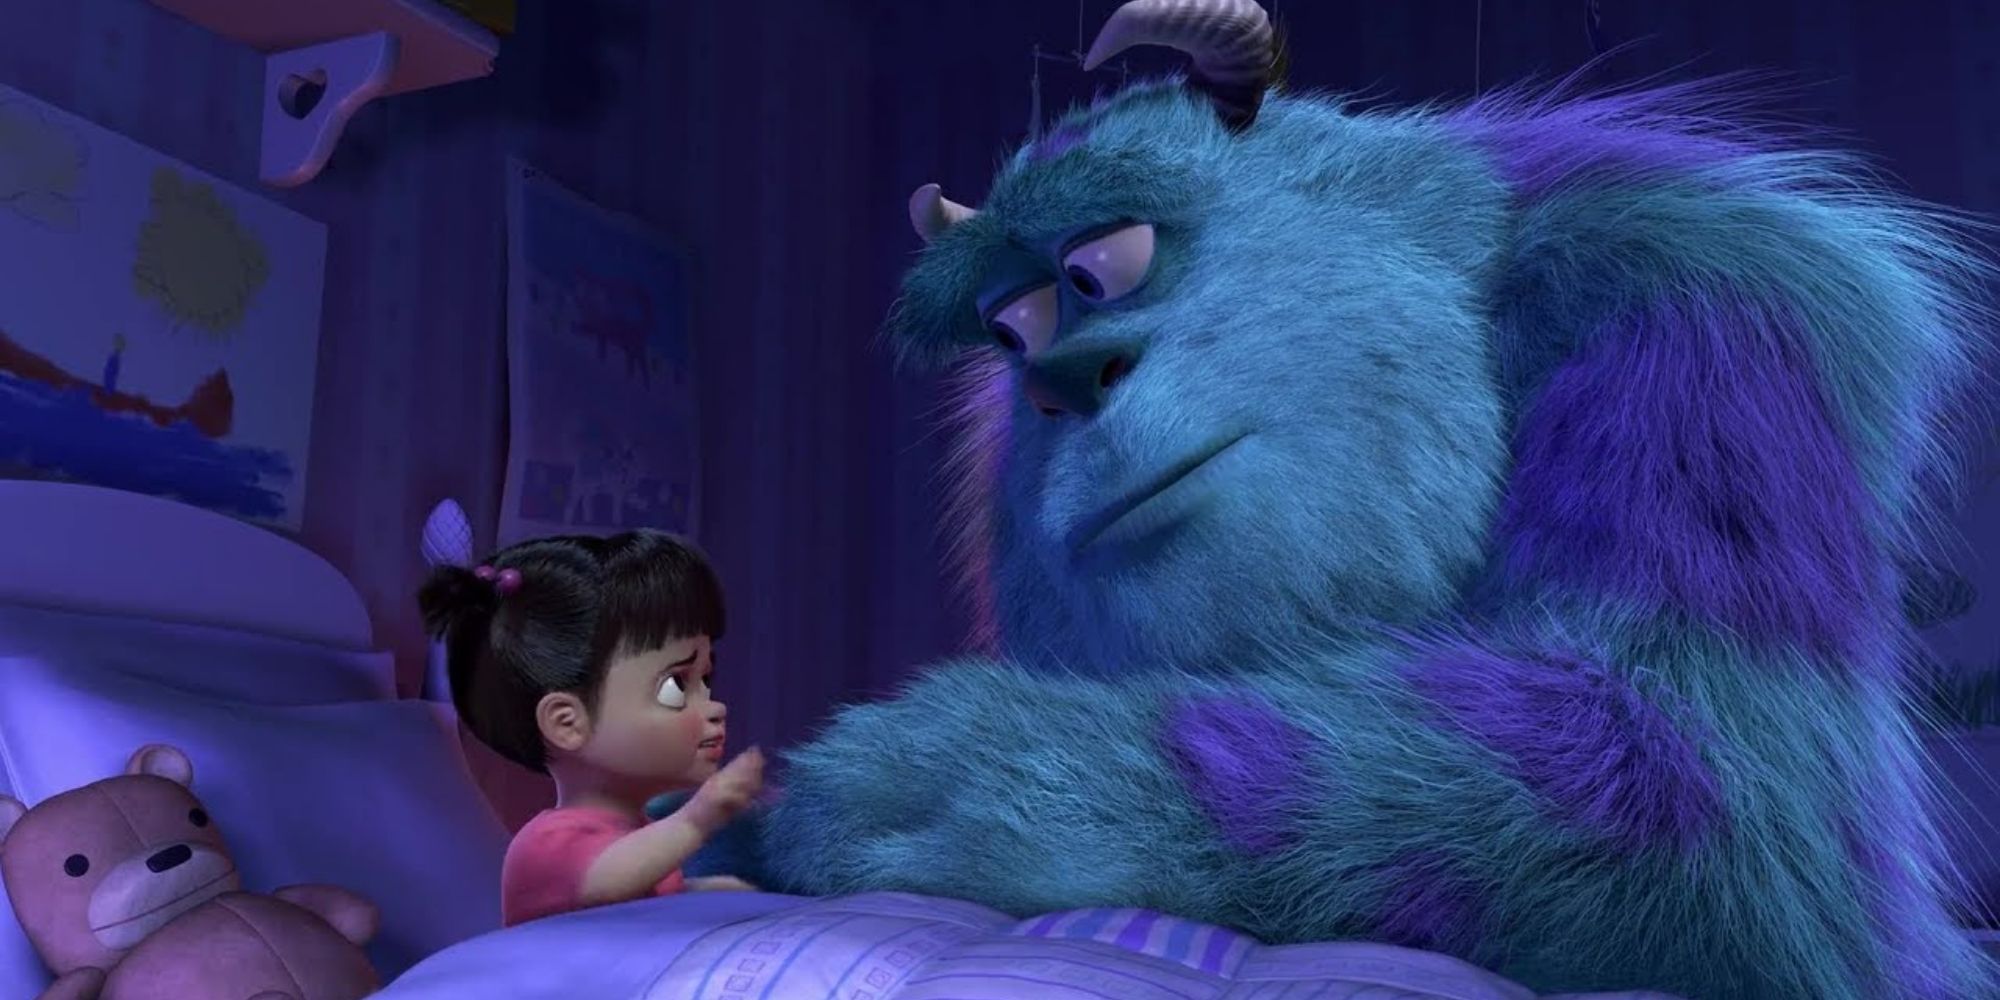 Sully putting Boo back in bed in Monsters, Inc.